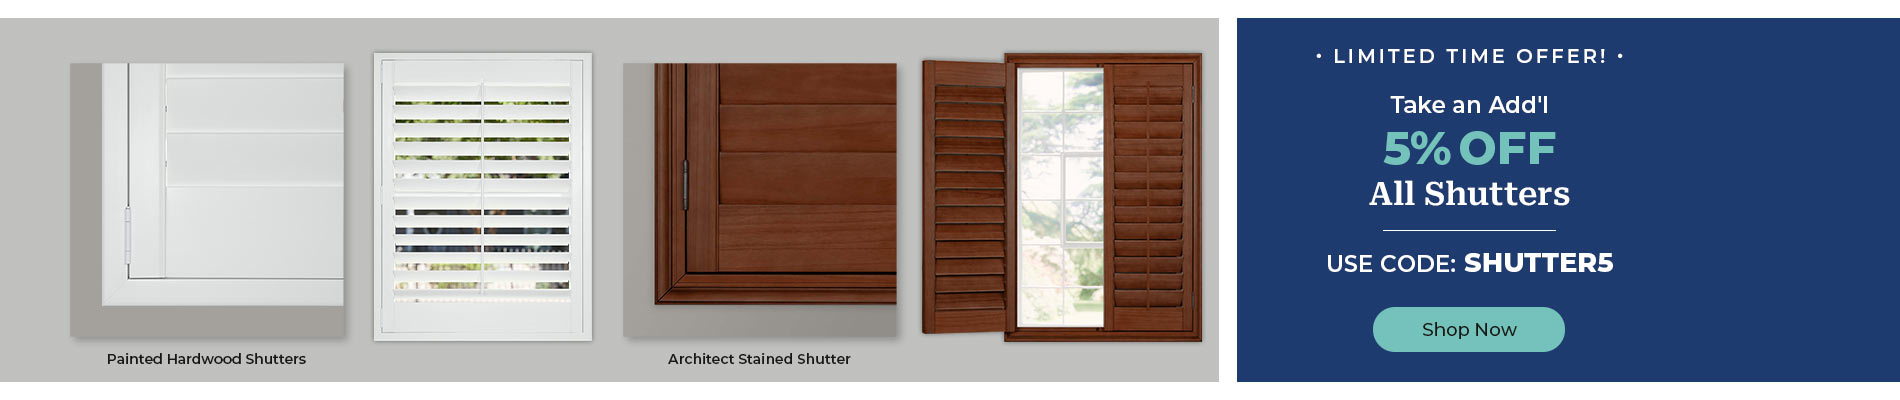 Add'l 5% off Shutters with Code SHUTTER5